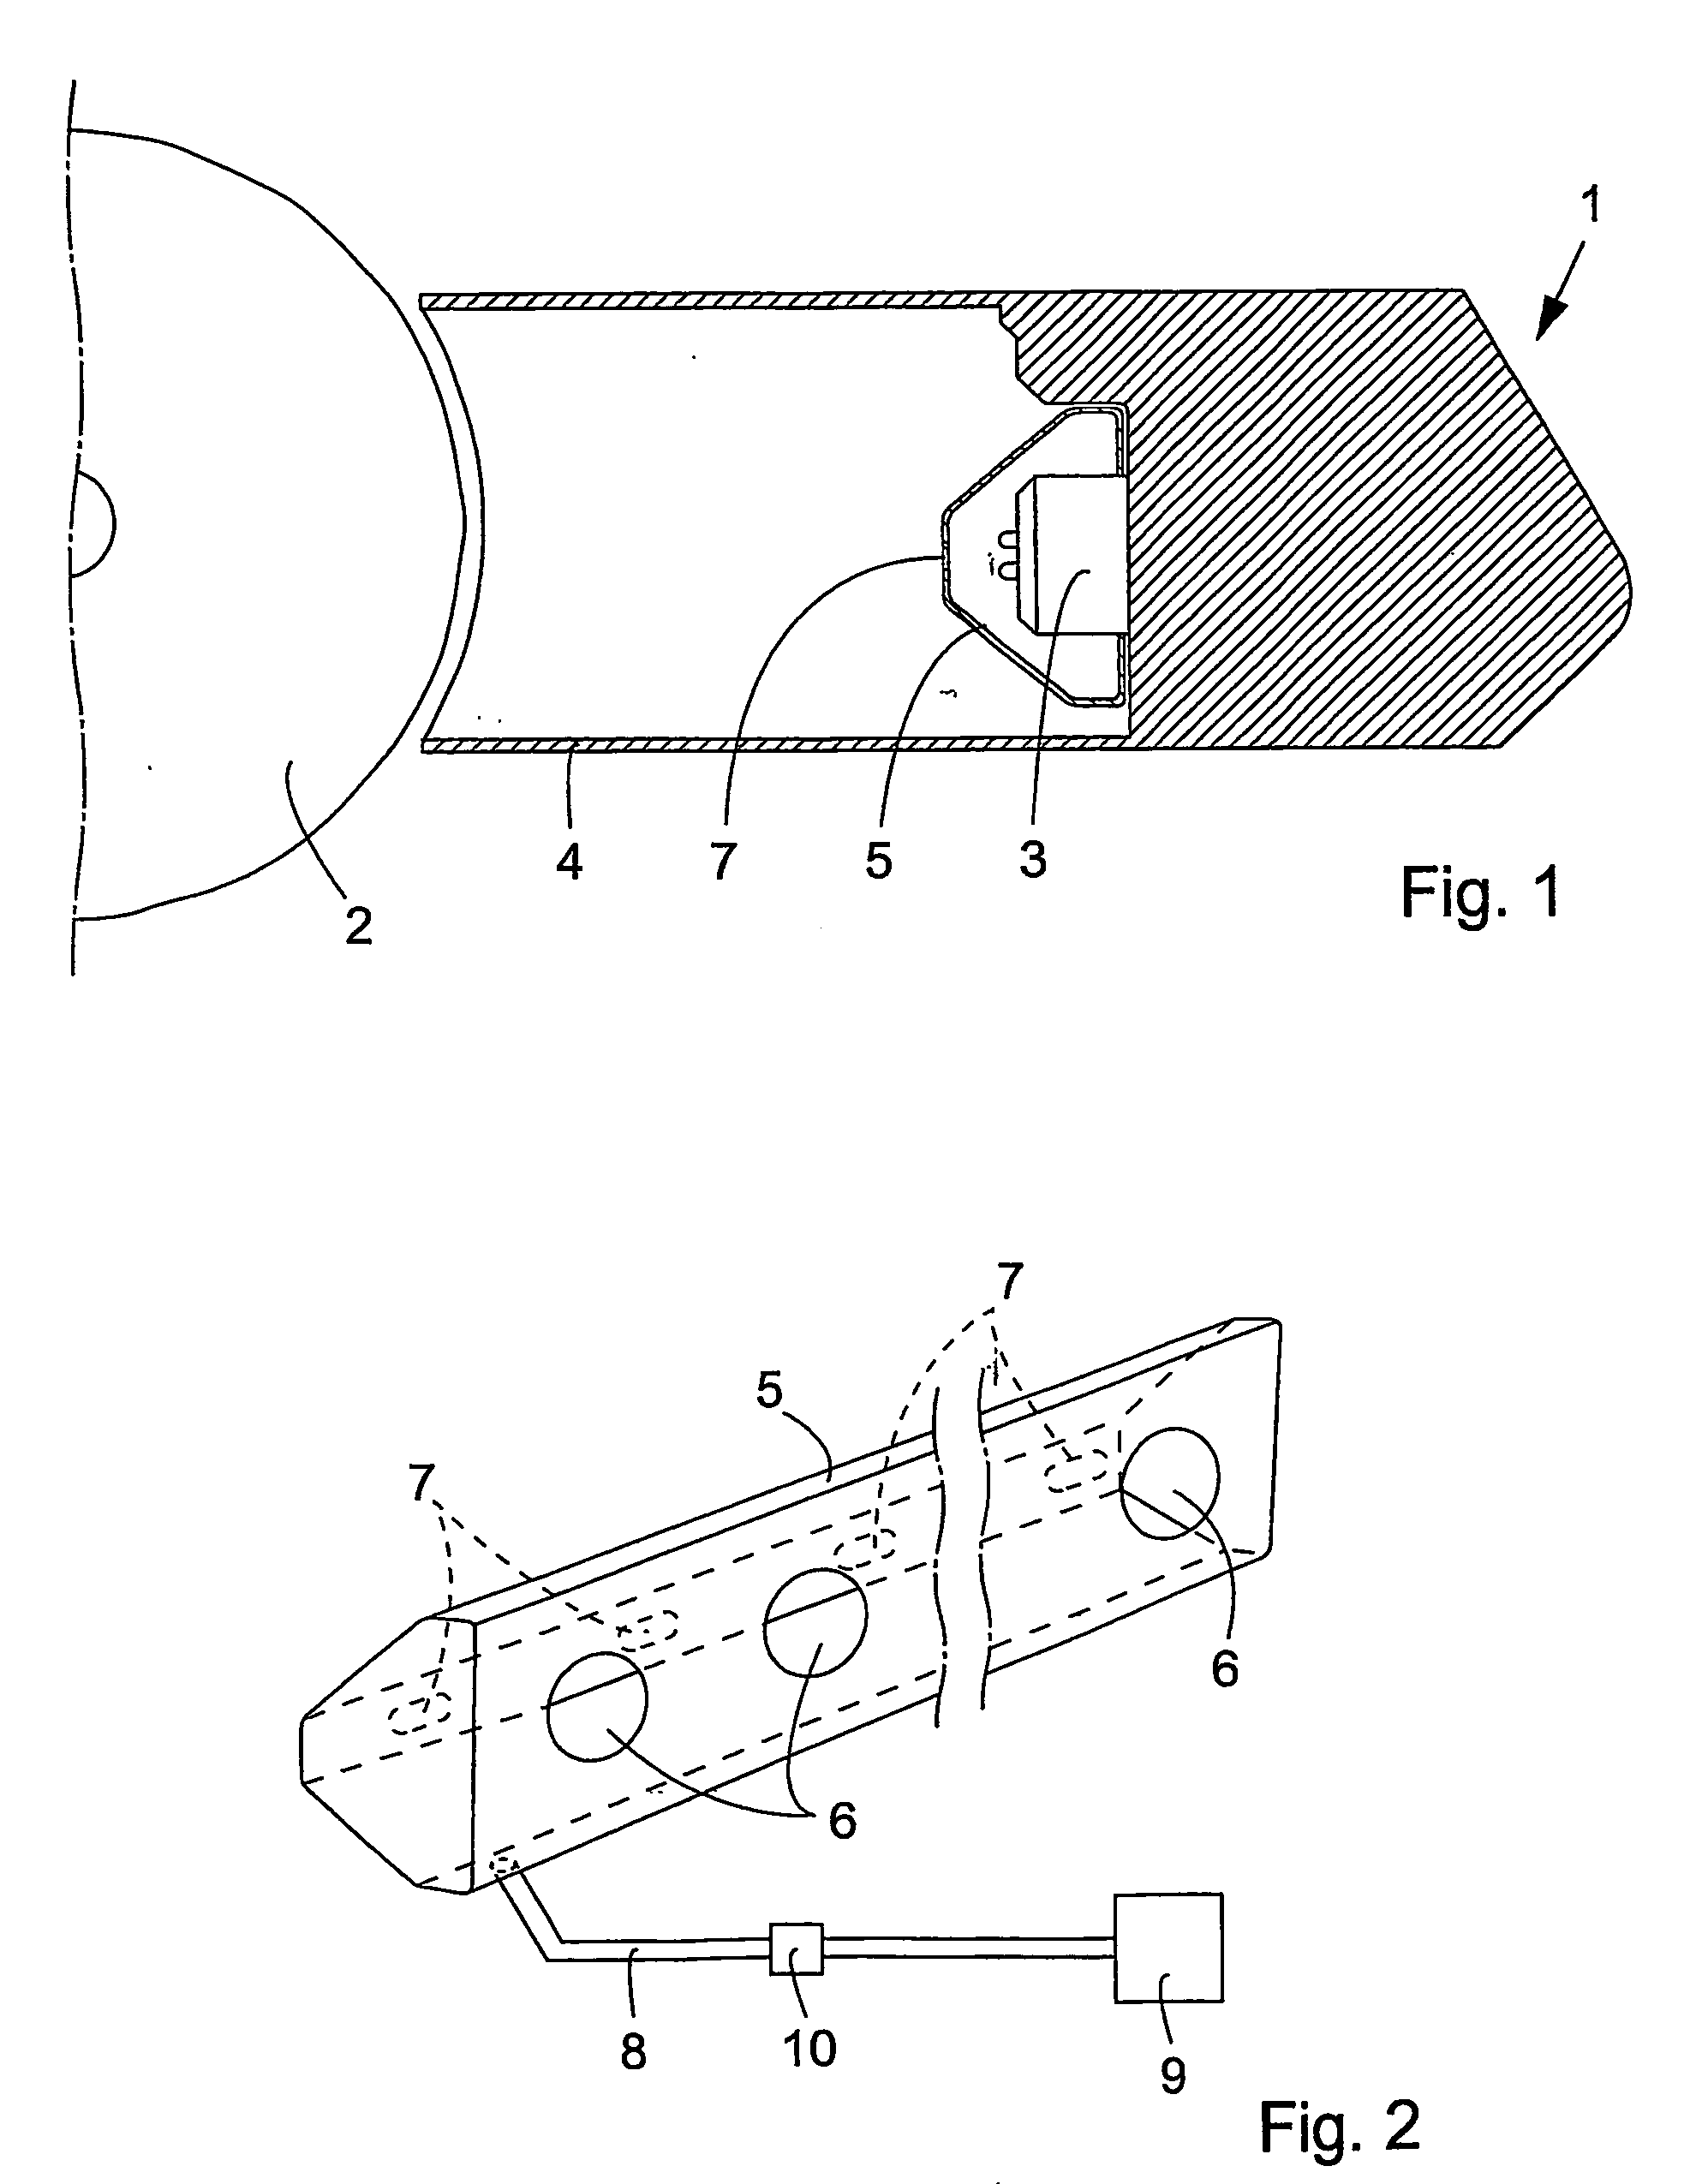 Method and device for keeping a number of spray nozzles in a printing press beam clean